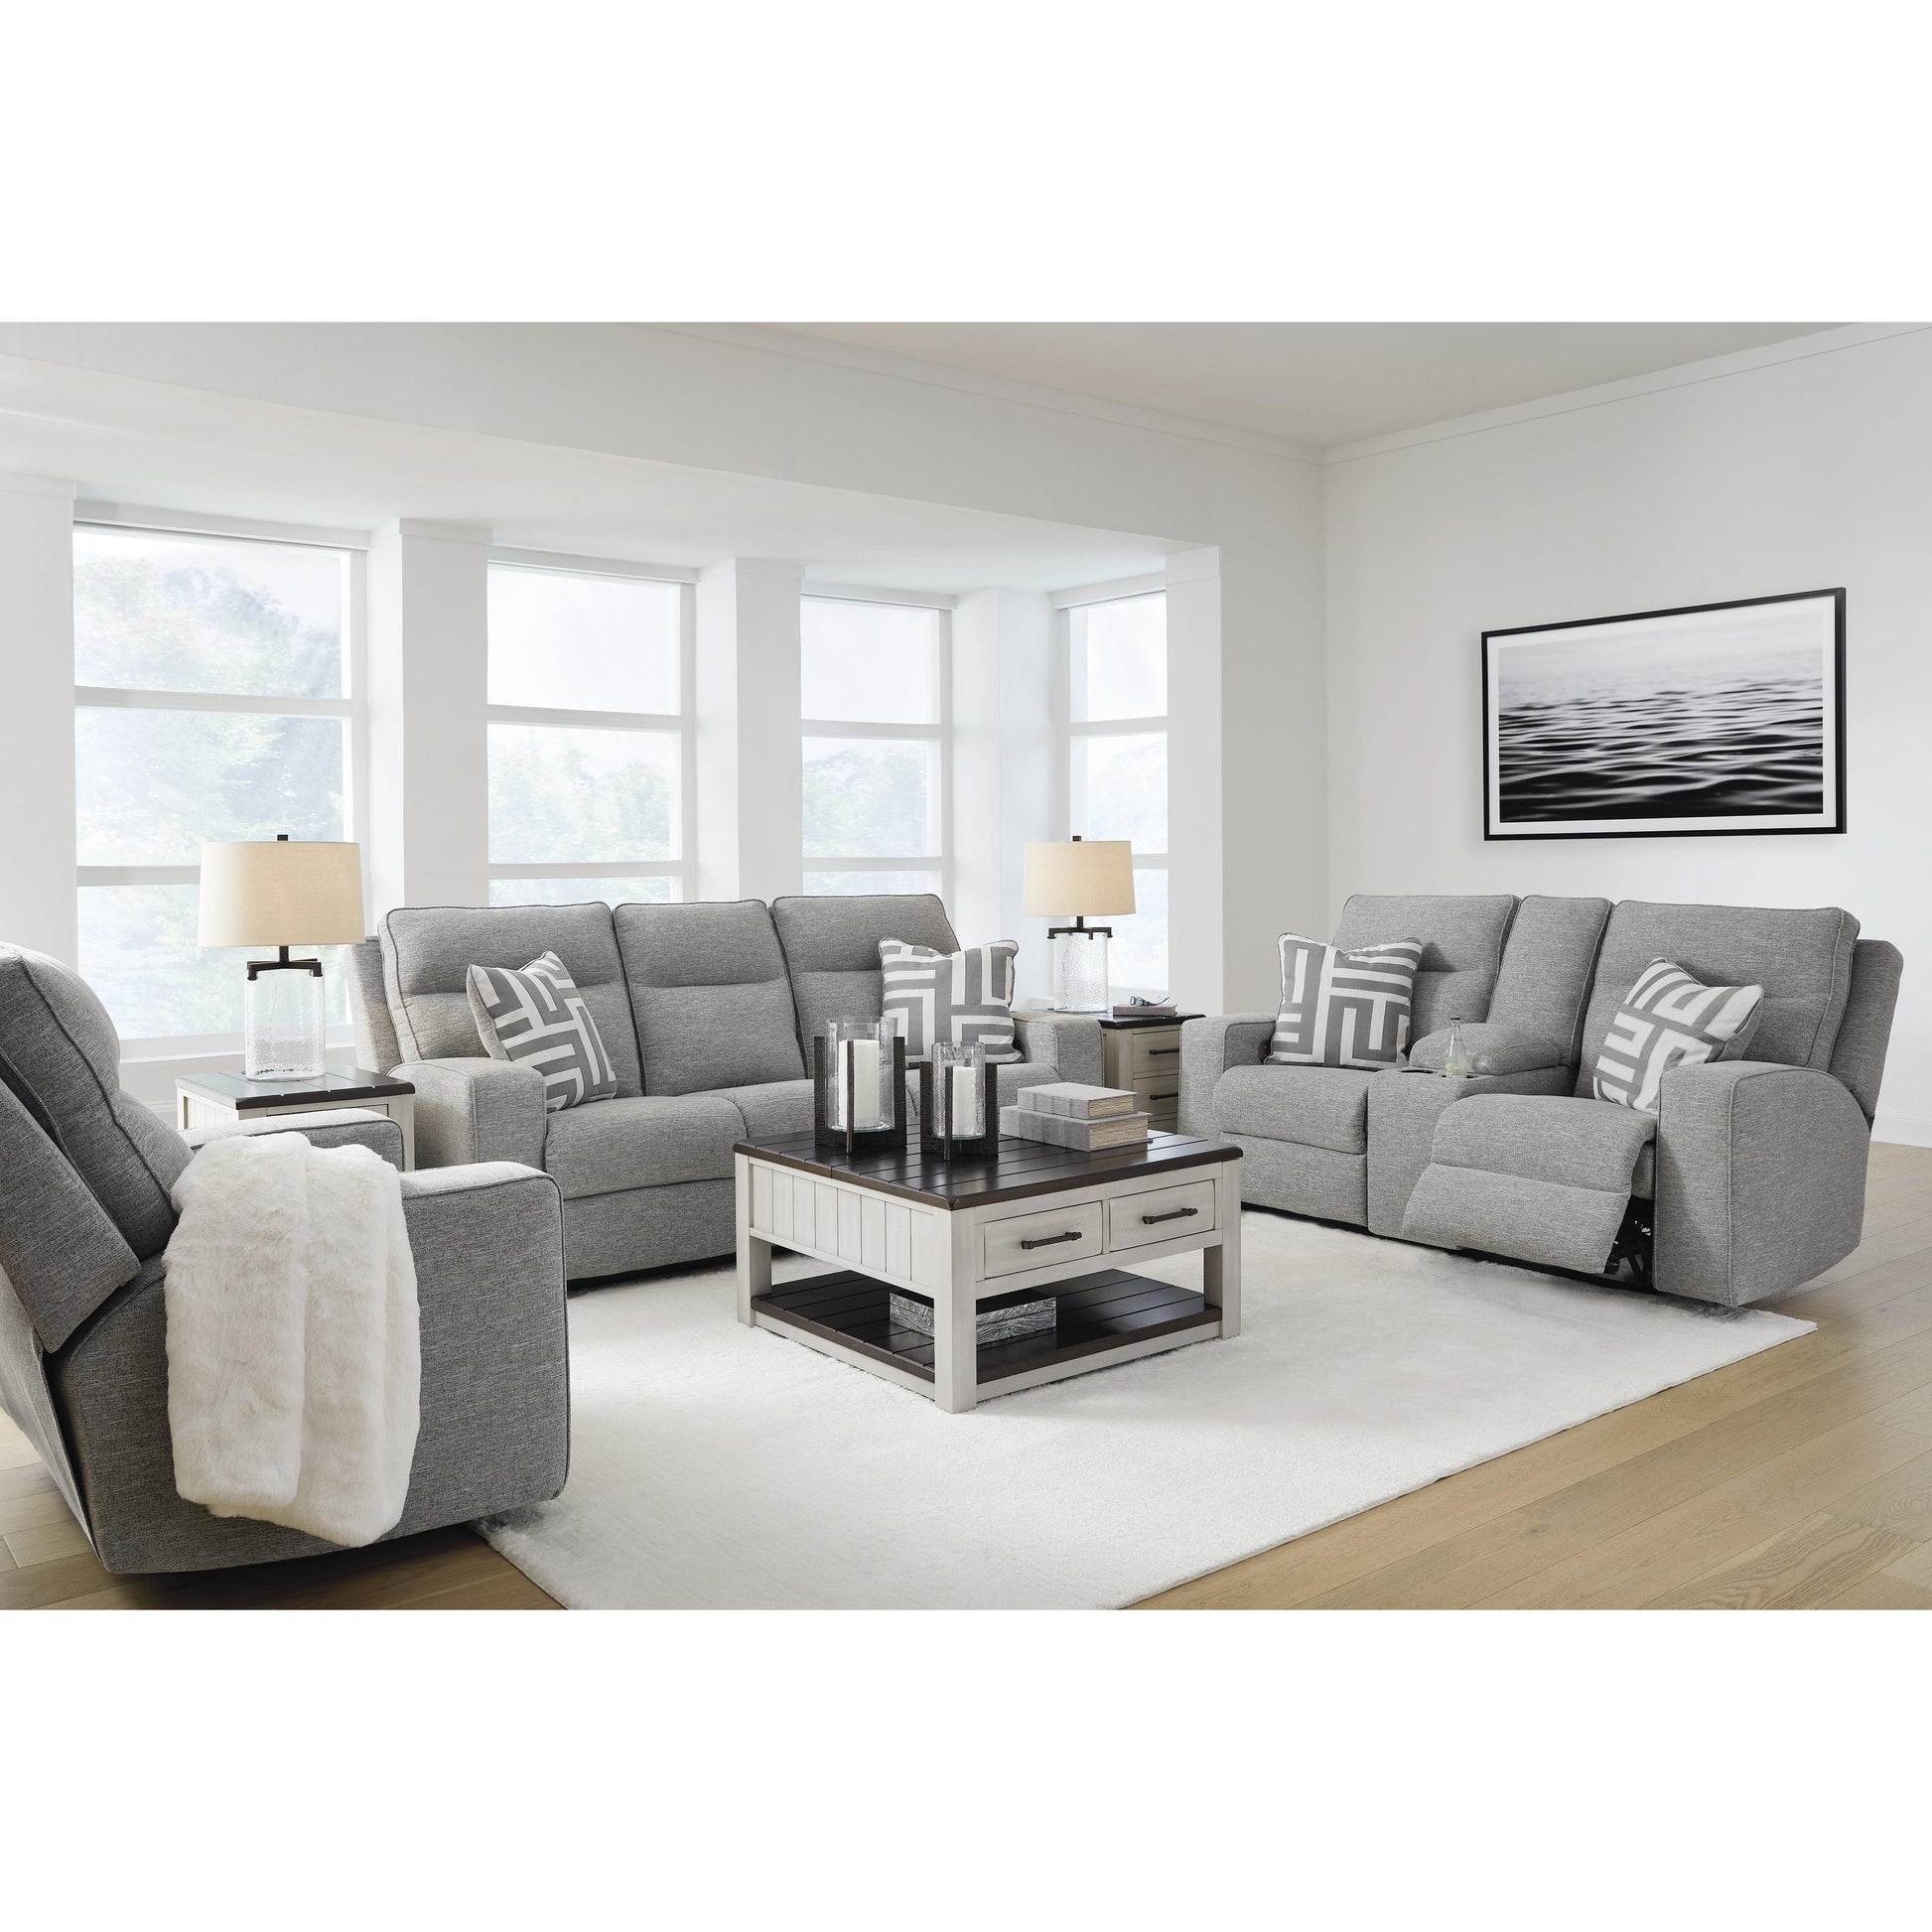 Signature Design by Ashley Biscoe Power Reclining Fabric Loveseat 9050318 IMAGE 17